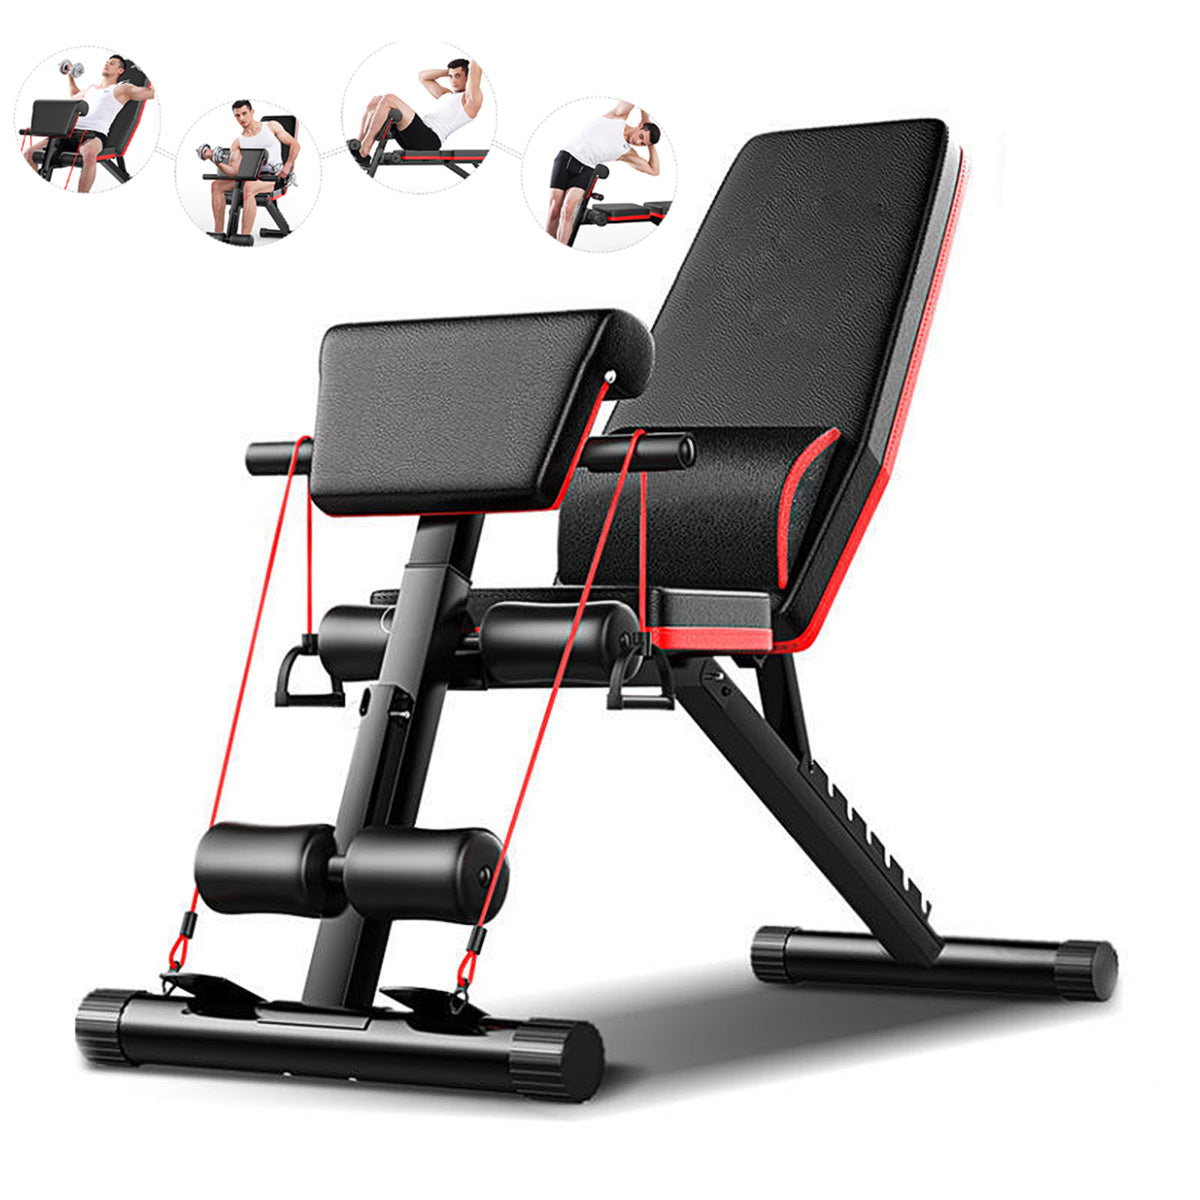 Multifunctional 5-in-1 Foldable Exercise Bench 7 Gears Adjustable AB Abdominal Training Fitness Weight Bench Max Load 350kg